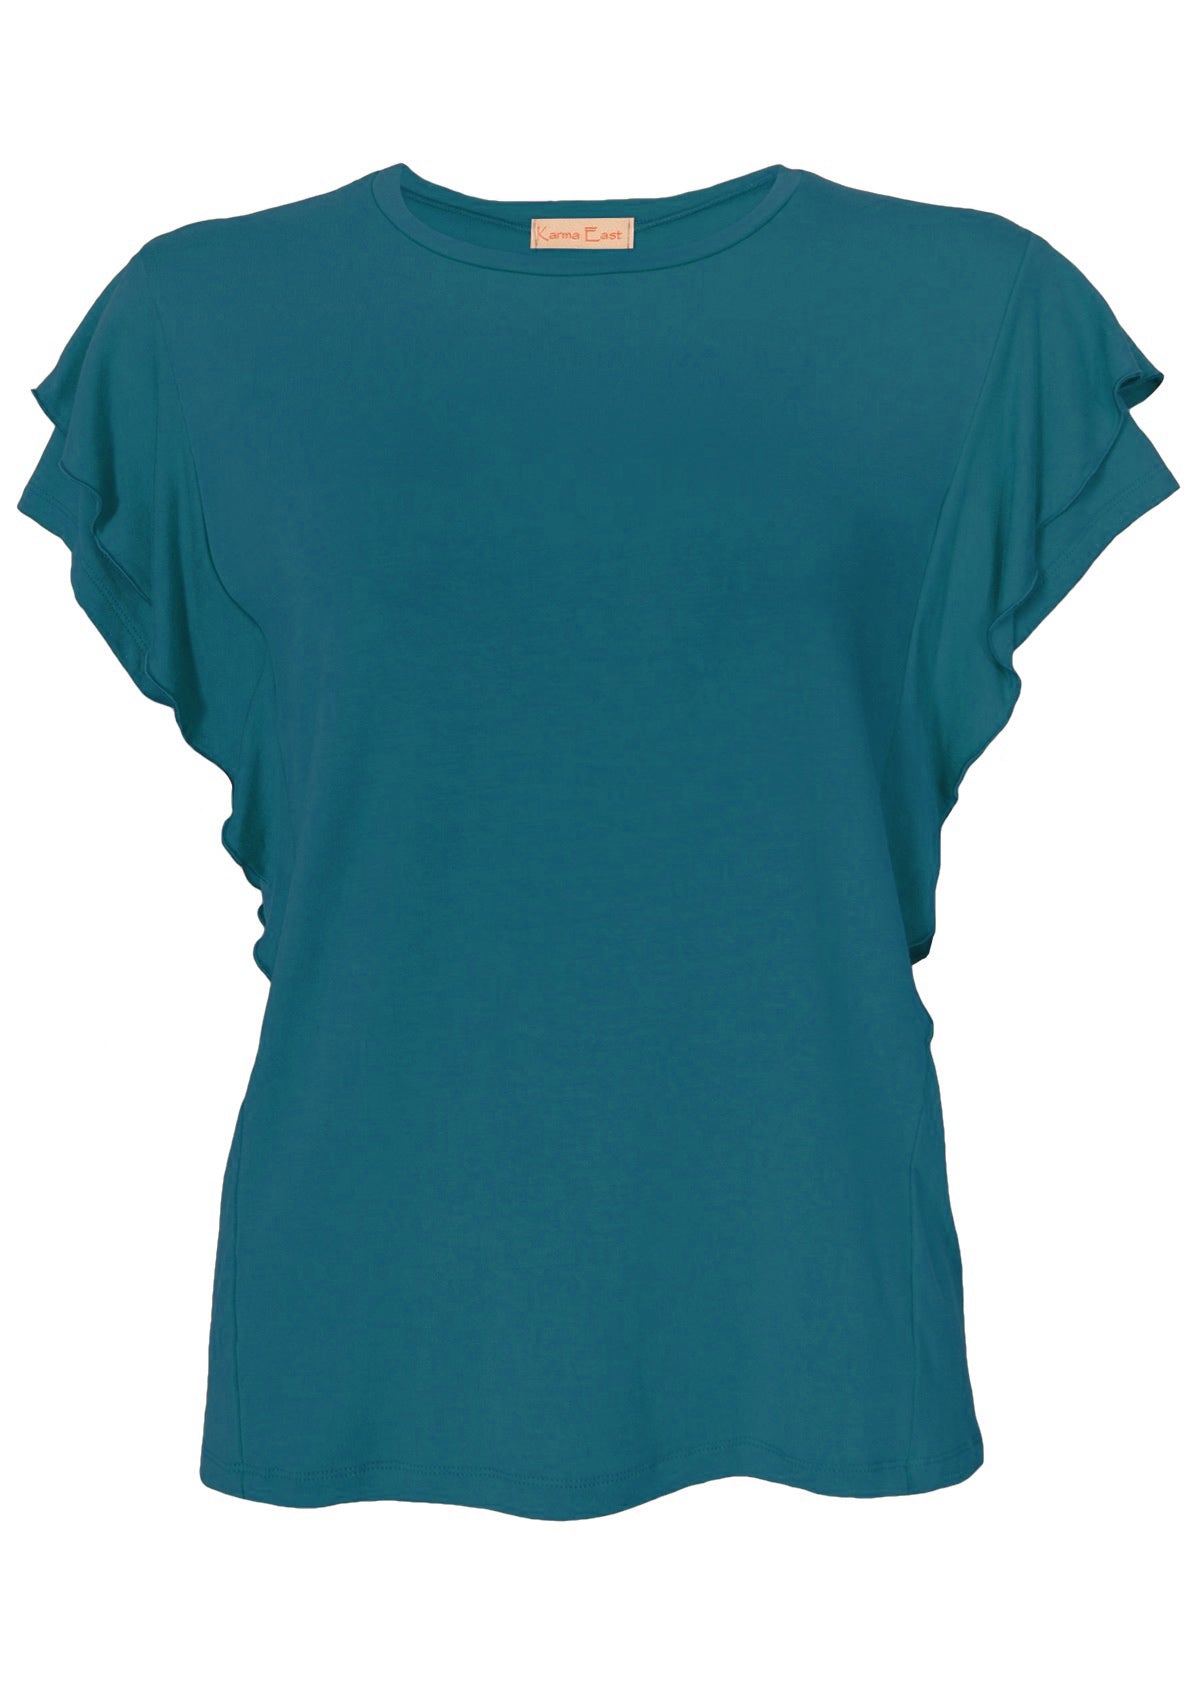 Front view of a women's teal ruffle rayon top.